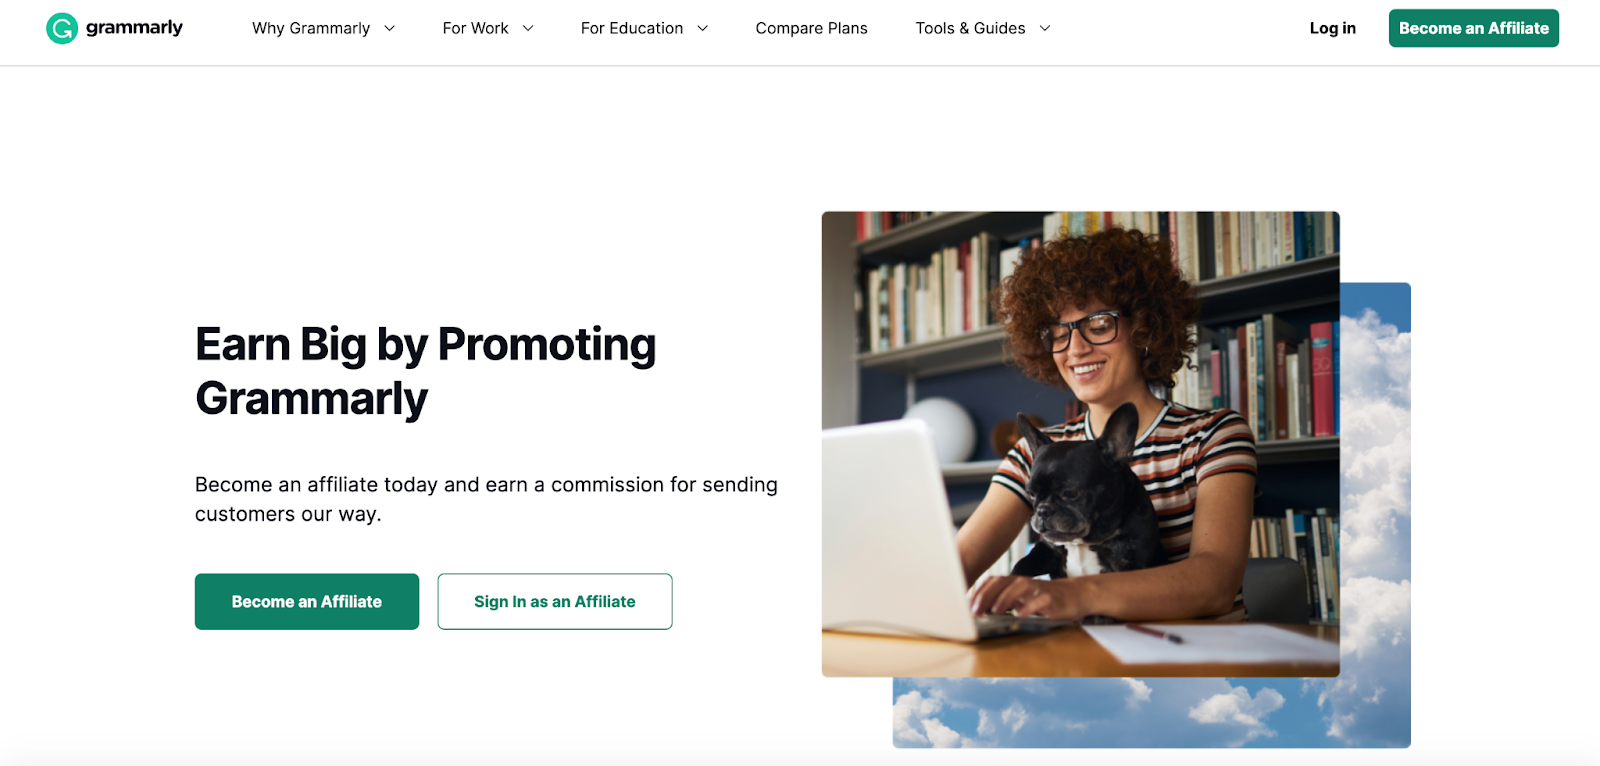 A screenshot of the Grammarly Affiliate Program featuring a photo of a girl with a laptop